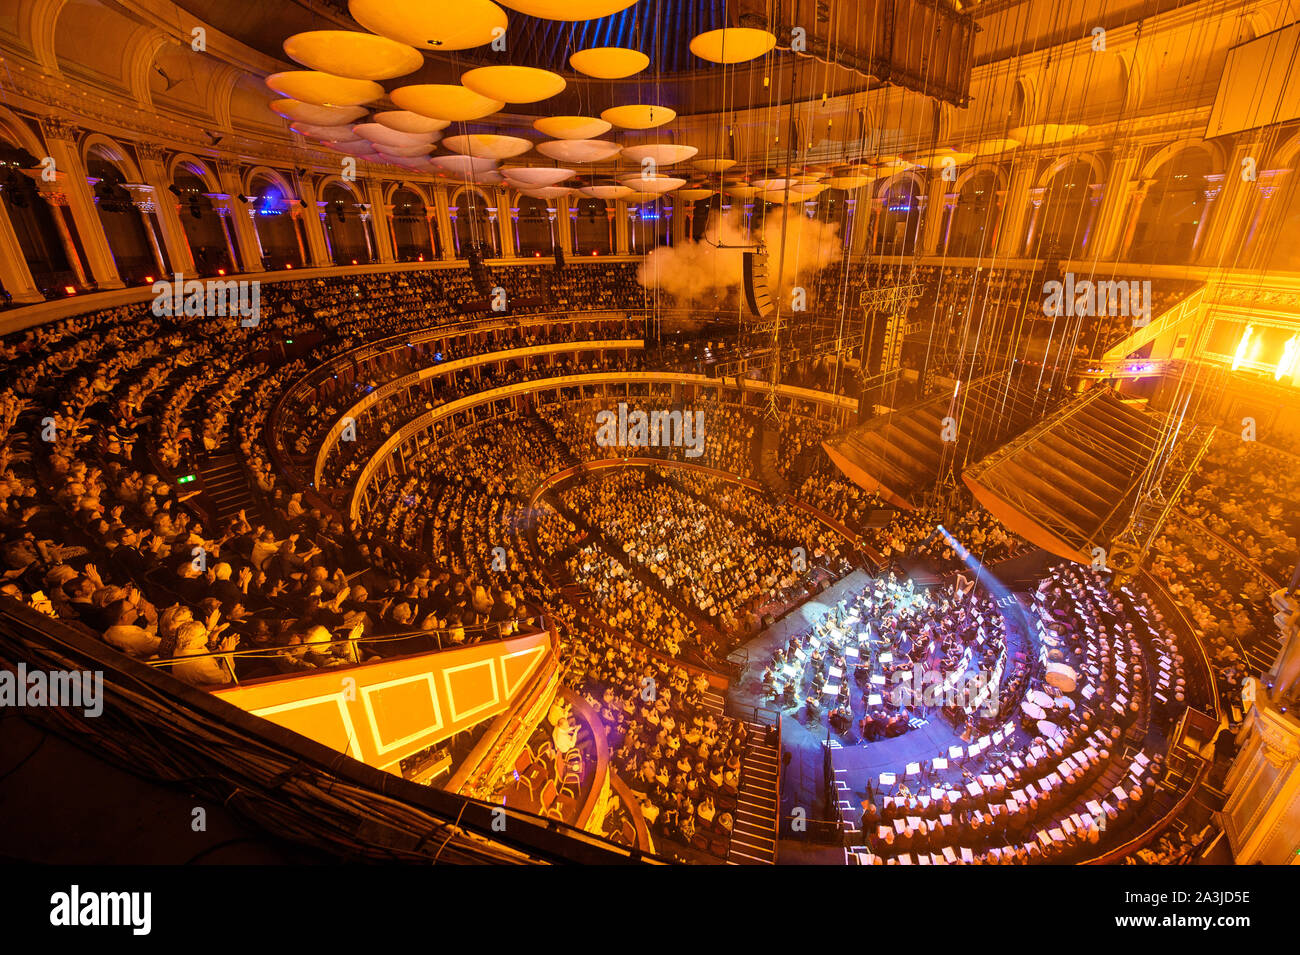 Pyrotechnics during the grand finale of the final performance lead by Stephen Barlow conducting the Bournemouth Sympathy Orchestra and Chorus during a performance of 1812 Overture by Tchaikovsky at Classic FM Live at London's Royal Albert Hall. Stock Photo